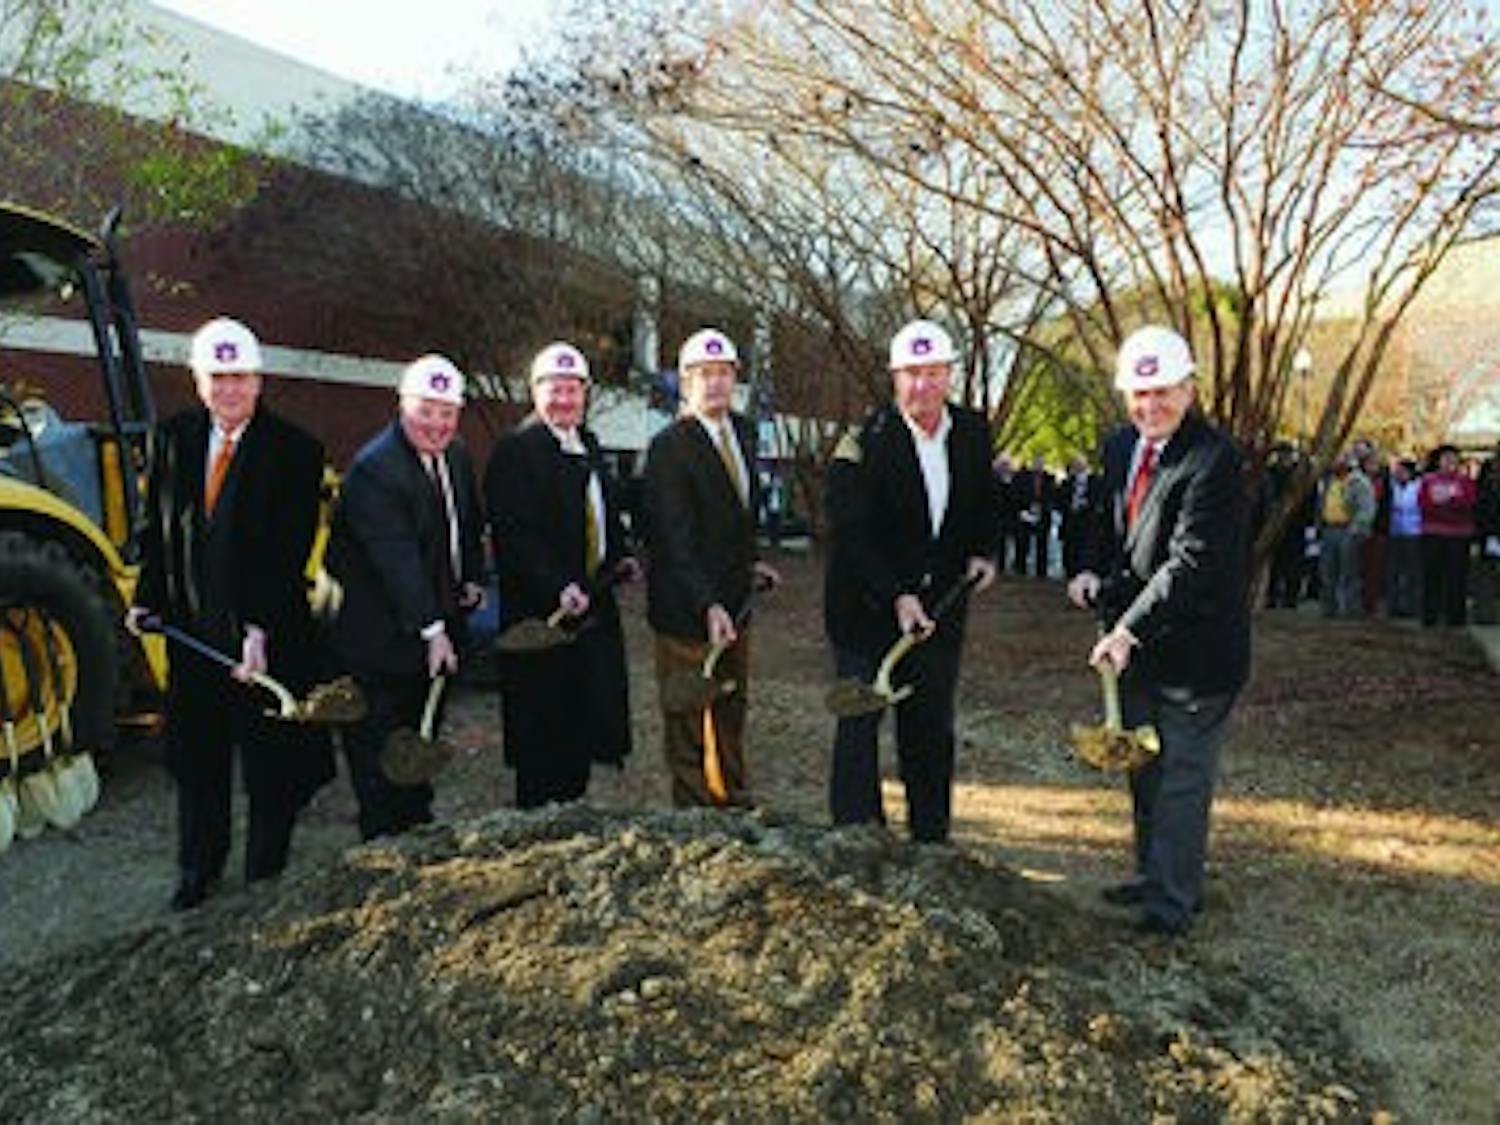 The groundbreaking ceremony celebrated the beginning of construction on the new animal hospital for the College of Veterinary Medicine. (Auburn University Photographic Services)